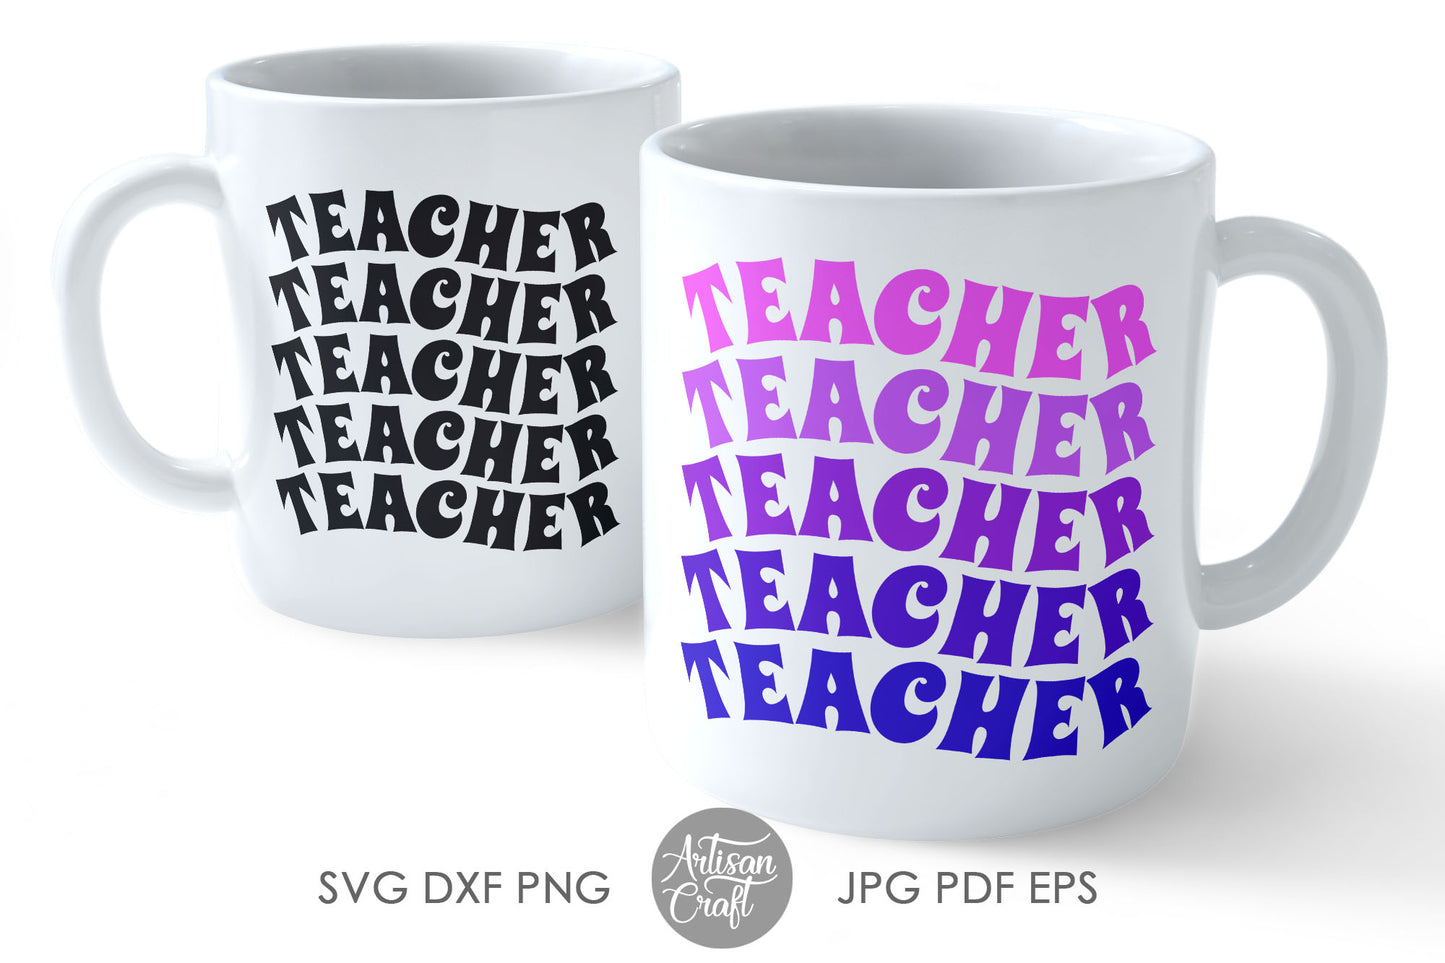 Retro teacher SVG with wavy letters